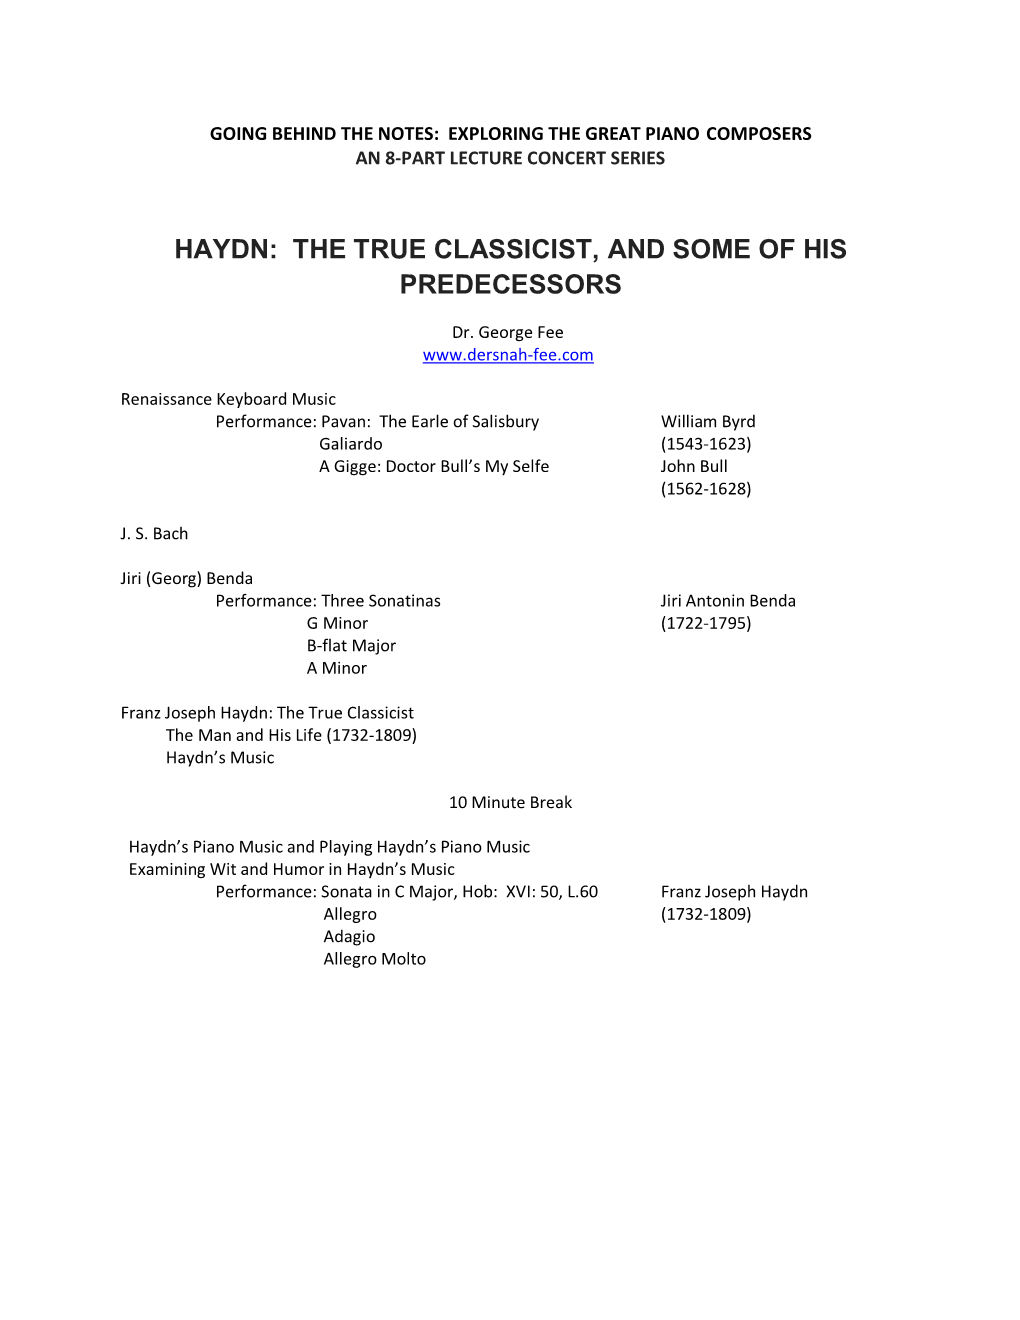 Haydn: the True Classicist, and Some of His Predecessors